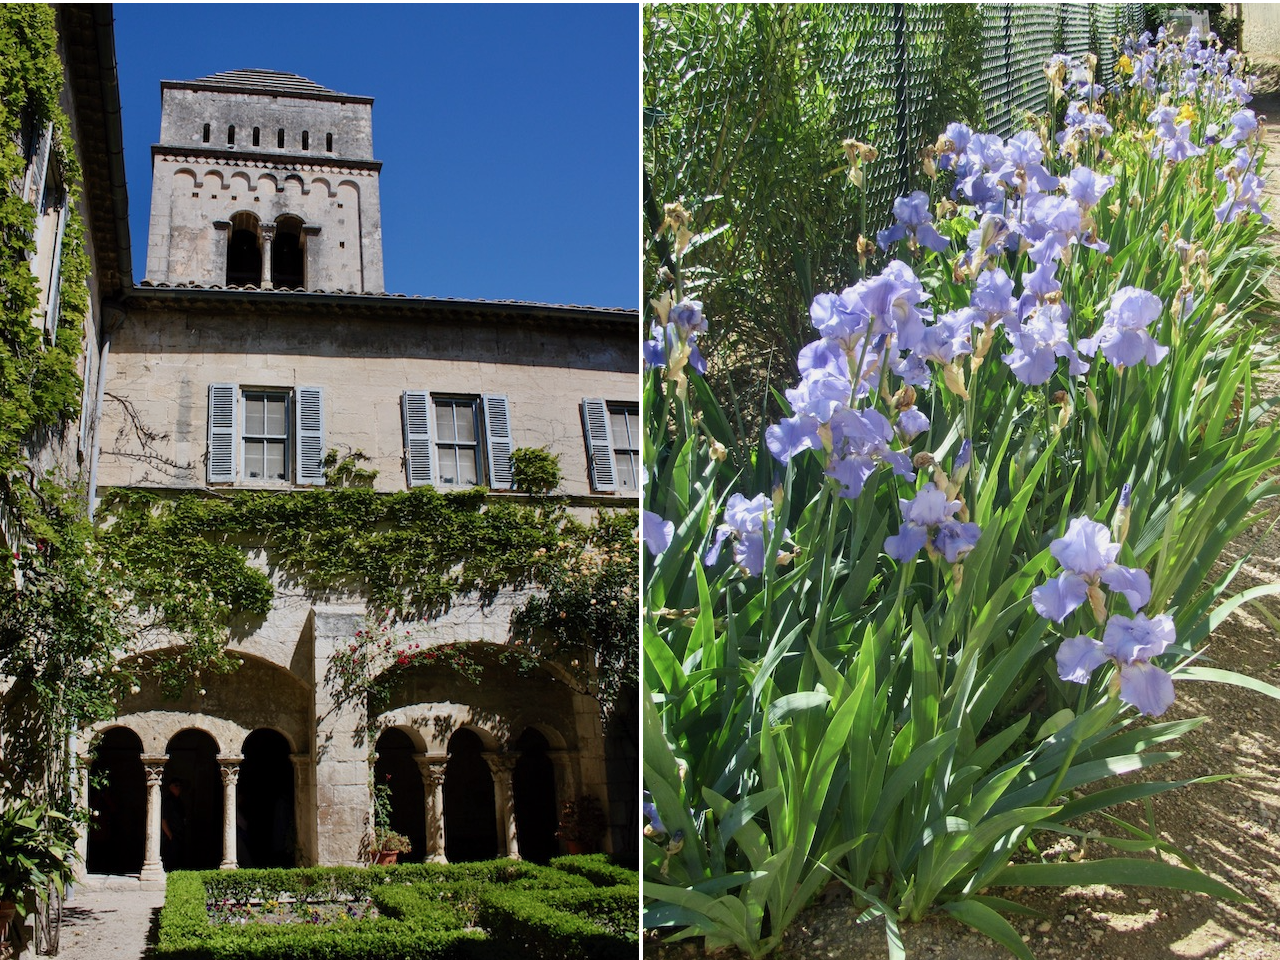 The asylum, and irises in the grounds